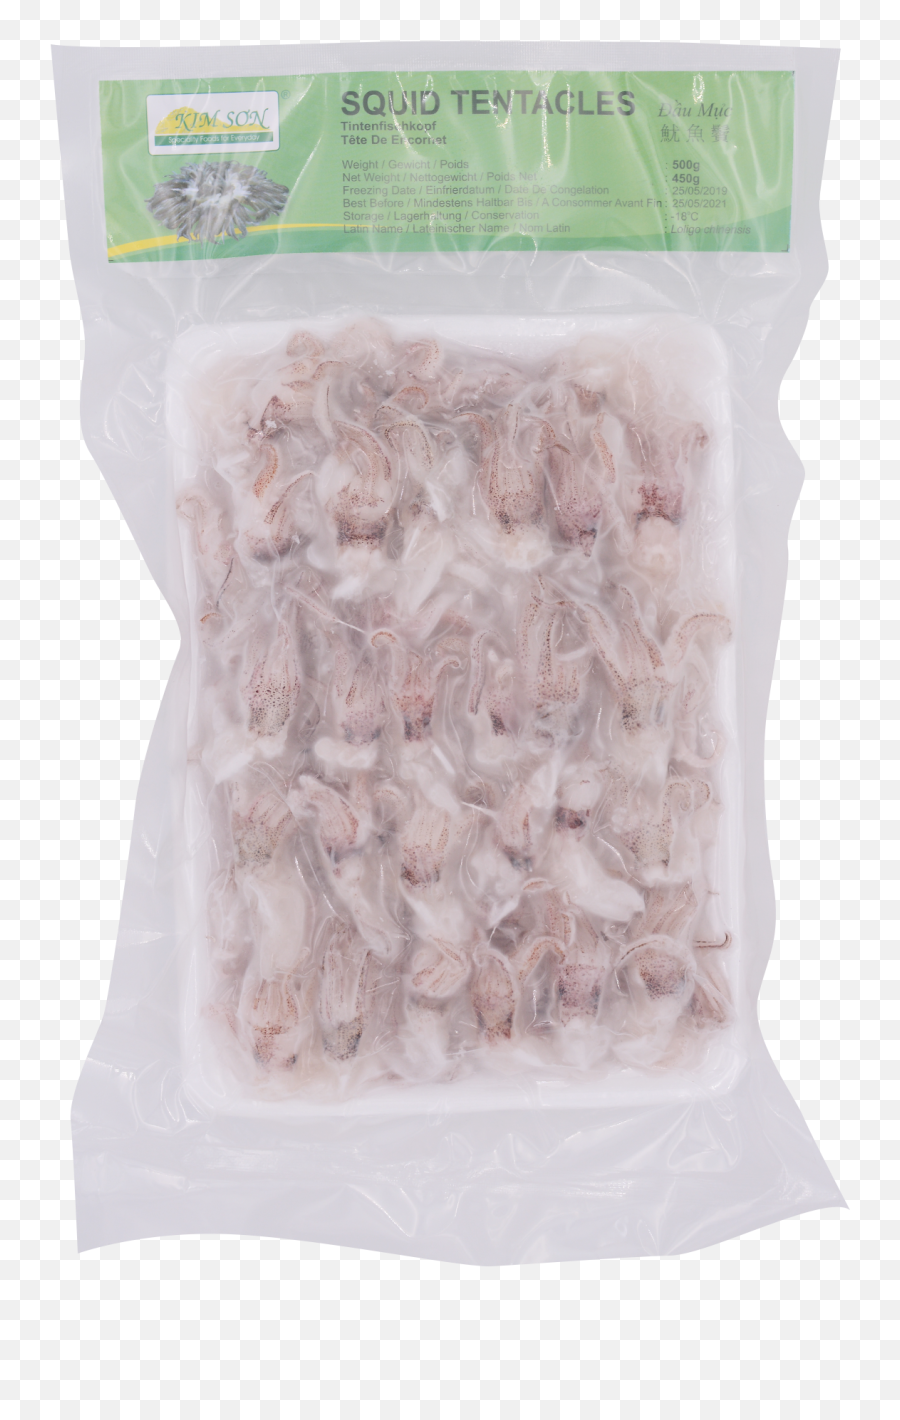 Kim Son Squid Tentacles Iqf 500g - Sunflower Seed Png,Tentacles Png